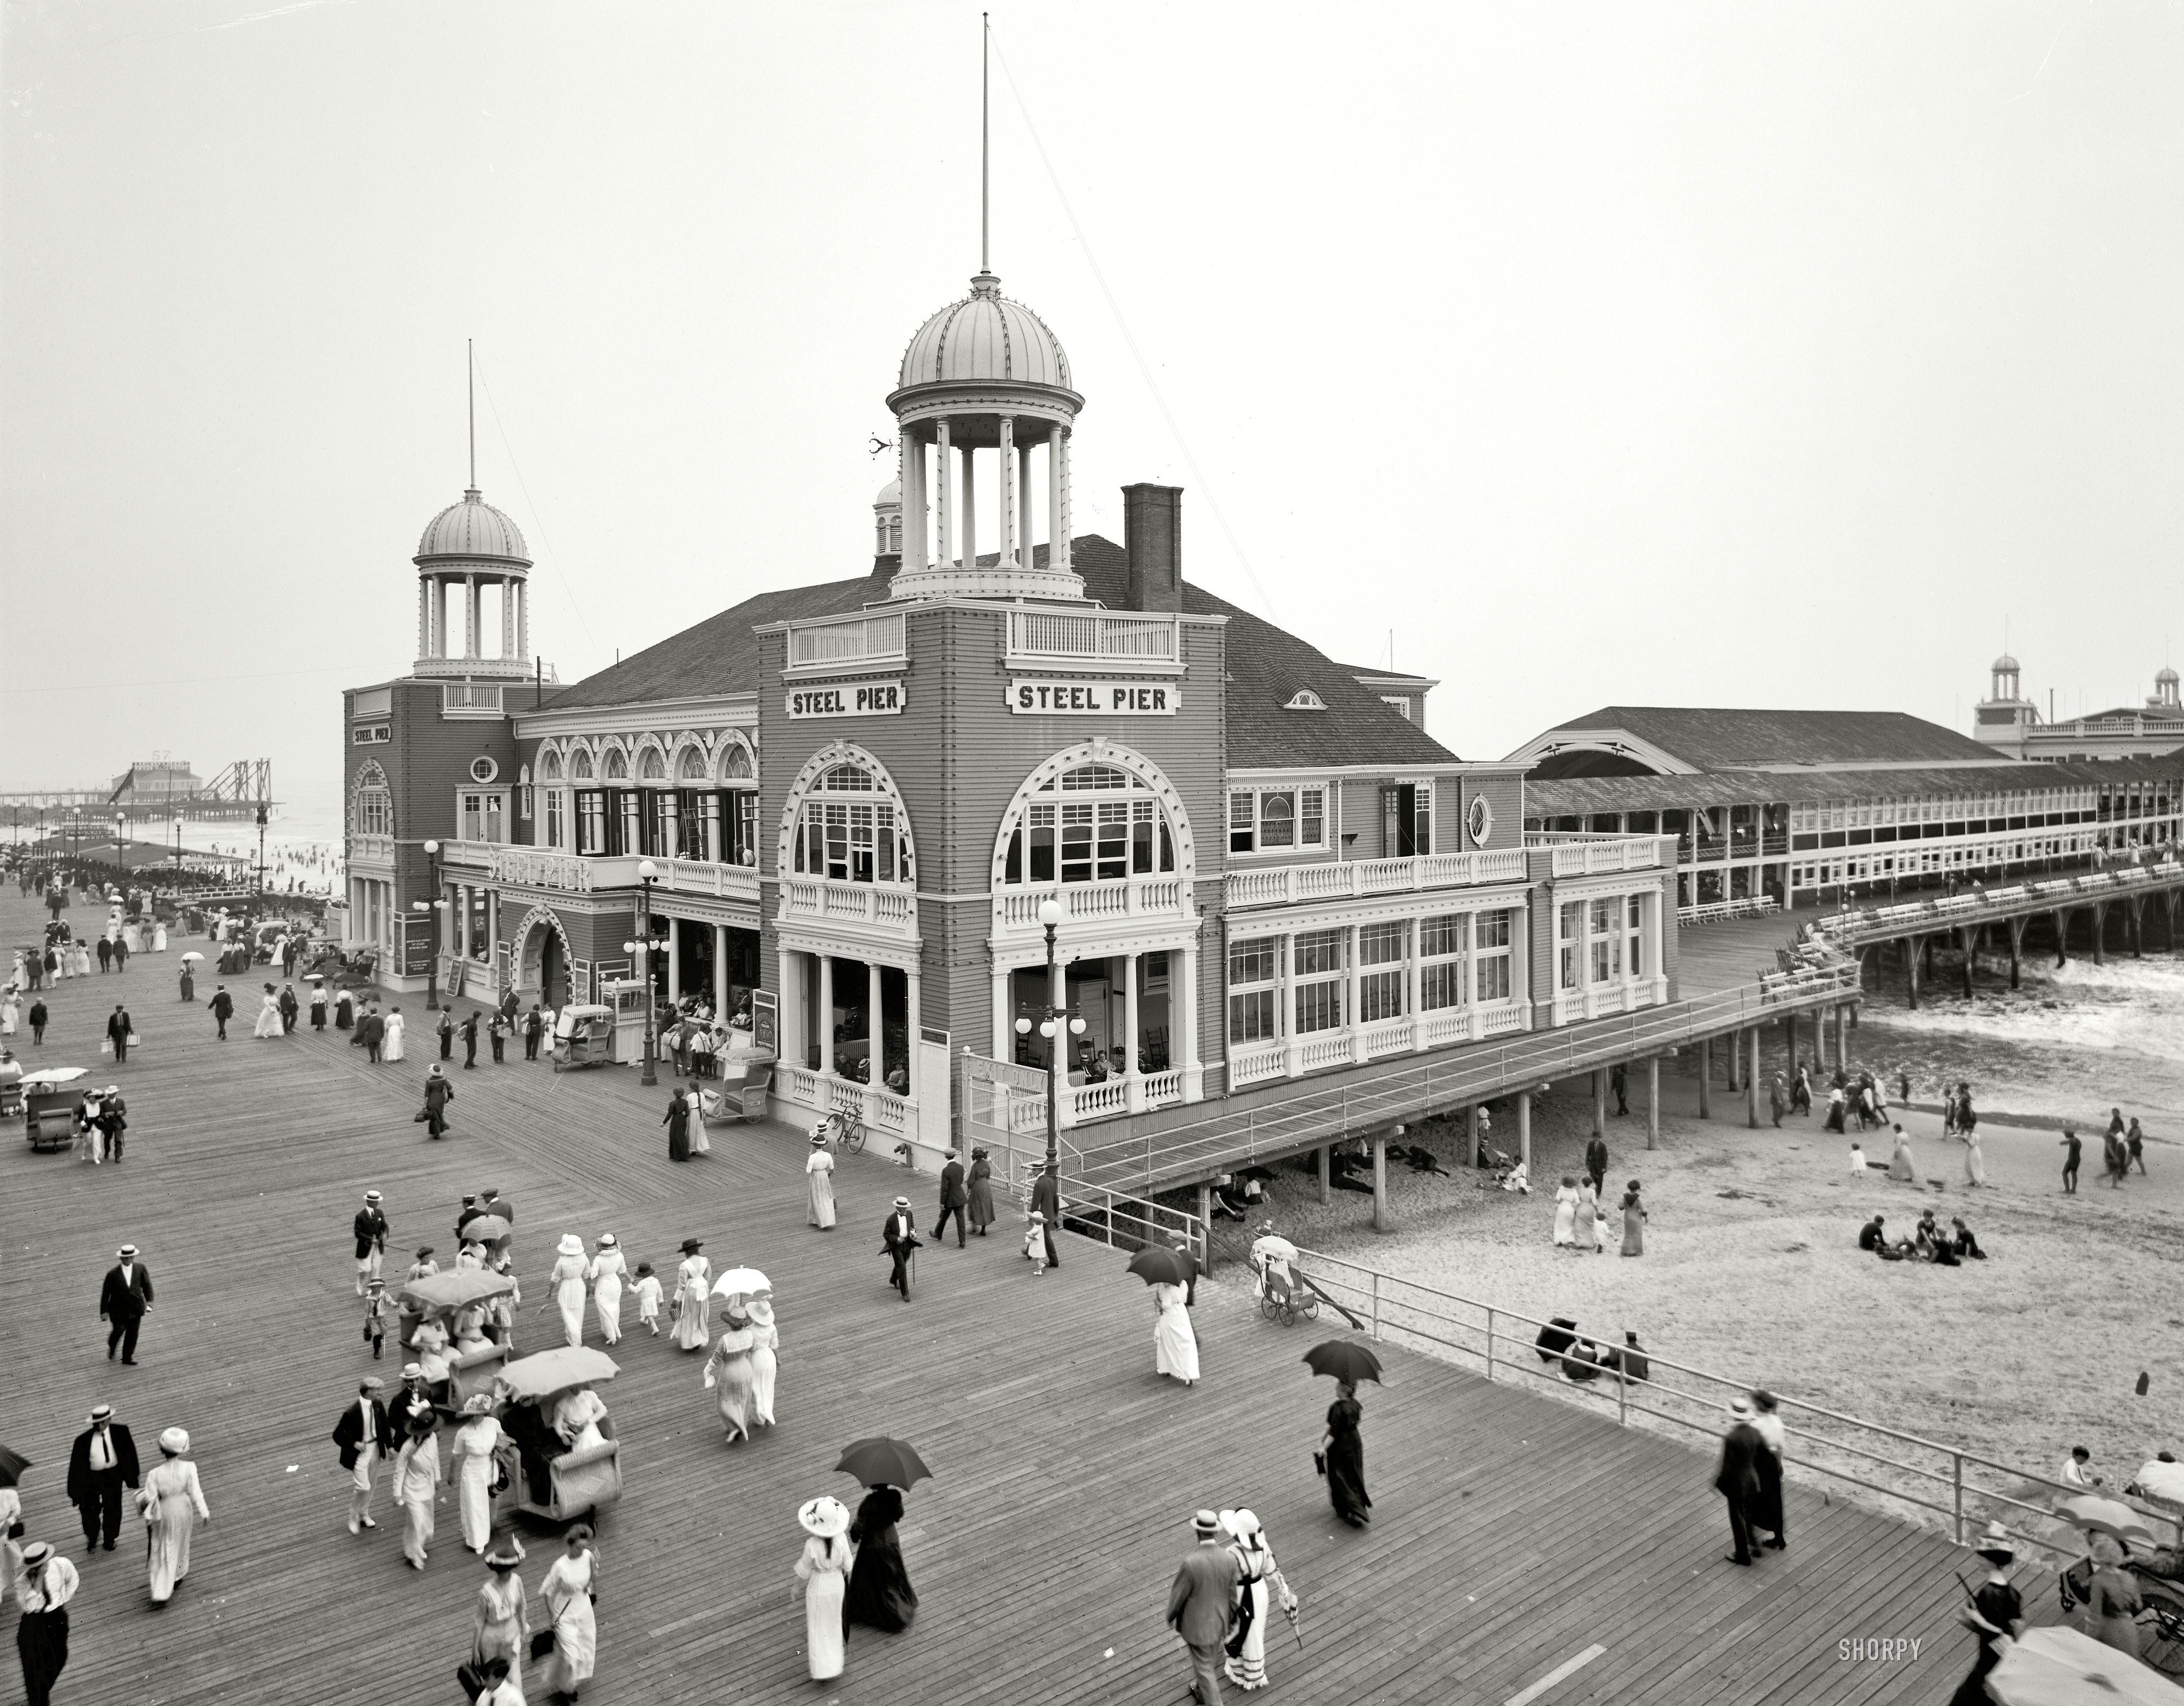 The Jersey Shore circa 1910. "Steel Pier, Atlantic City." Now playing: Vessella's Italian Band. 8x10 inch glass negative, Detroit Publishing Co. View full size.